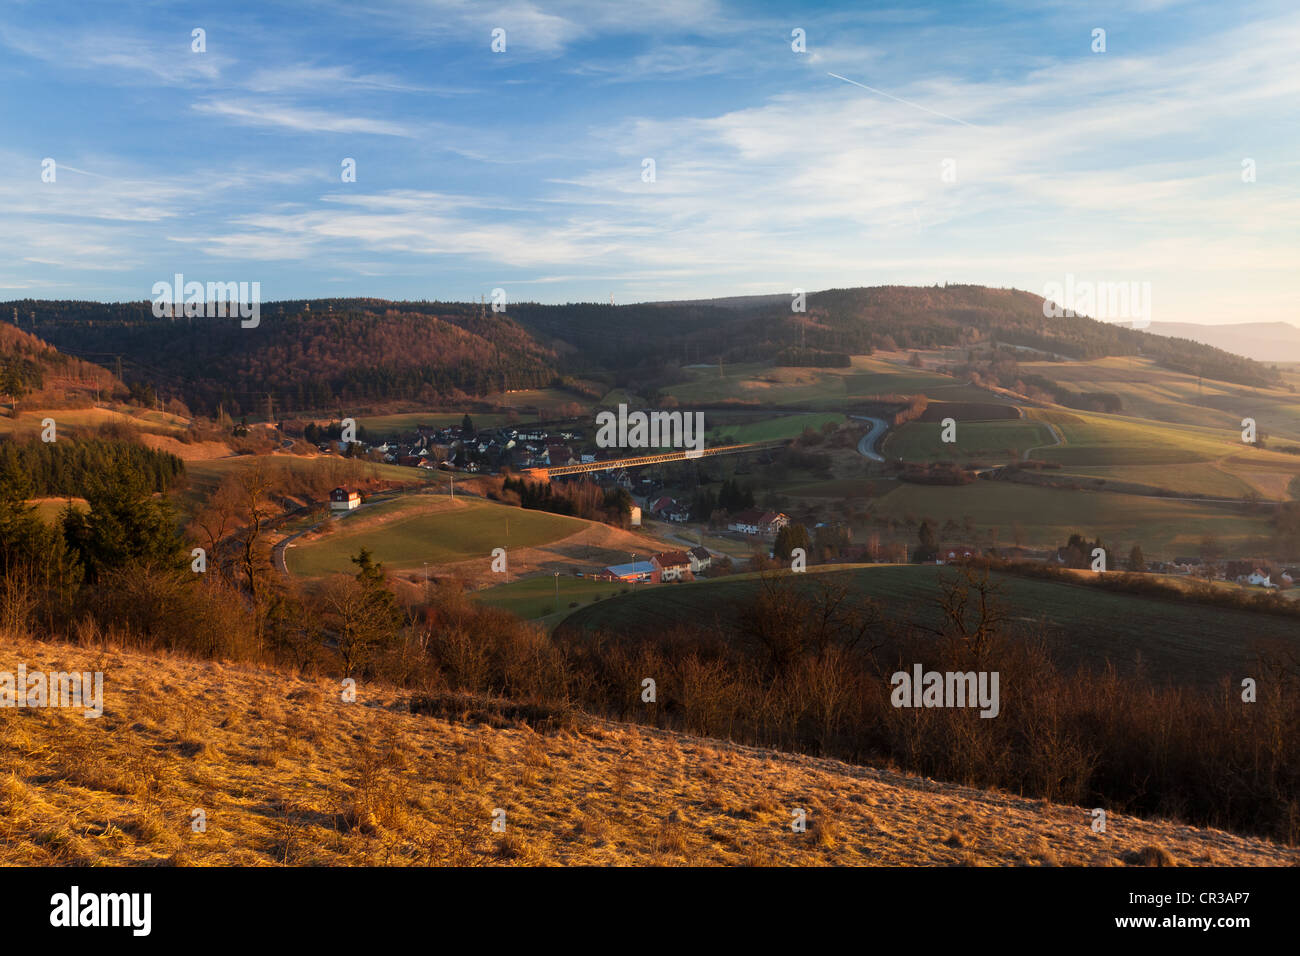 Wutachtal valley at sunset and Epfenhofen, Baden-Wuerttemberg, Germany, Europe Stock Photo